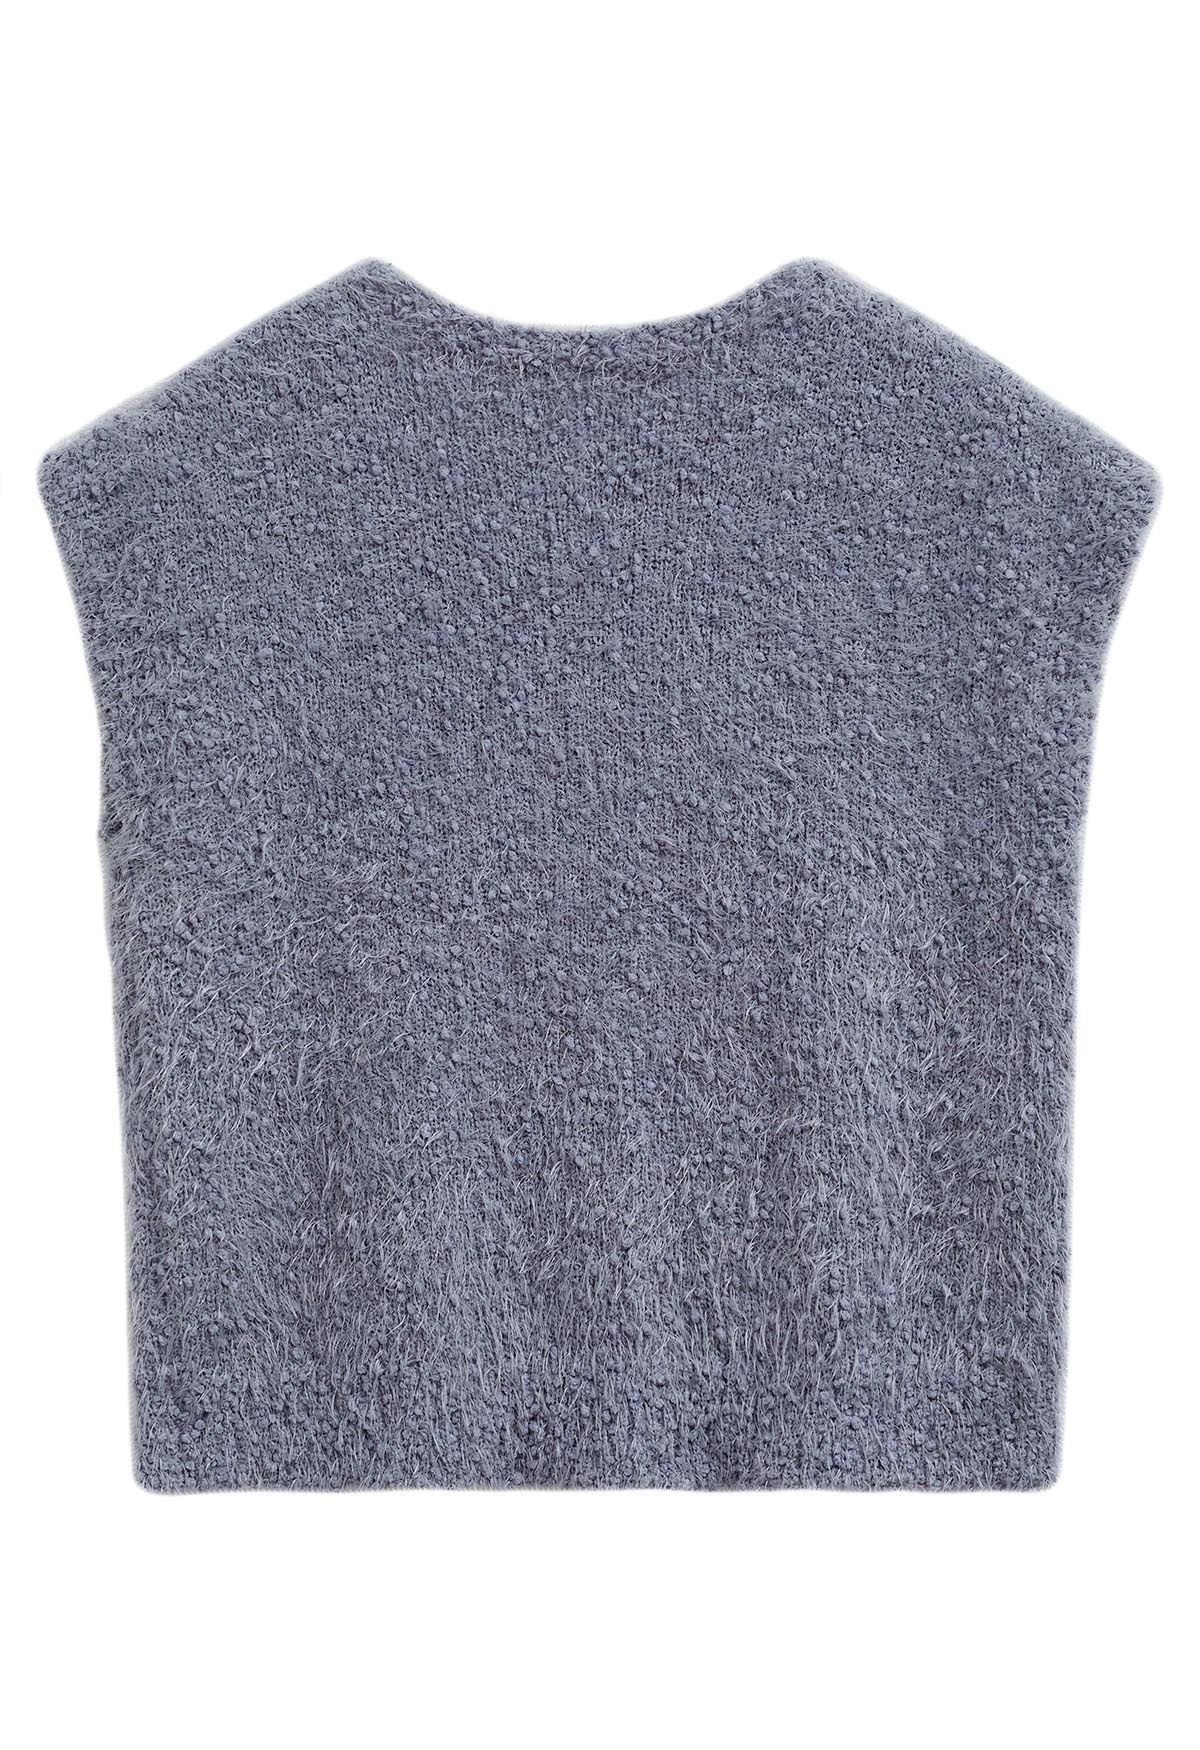 Fuzzy Dotted Sleeveless Knit Sweater in Dusty Blue